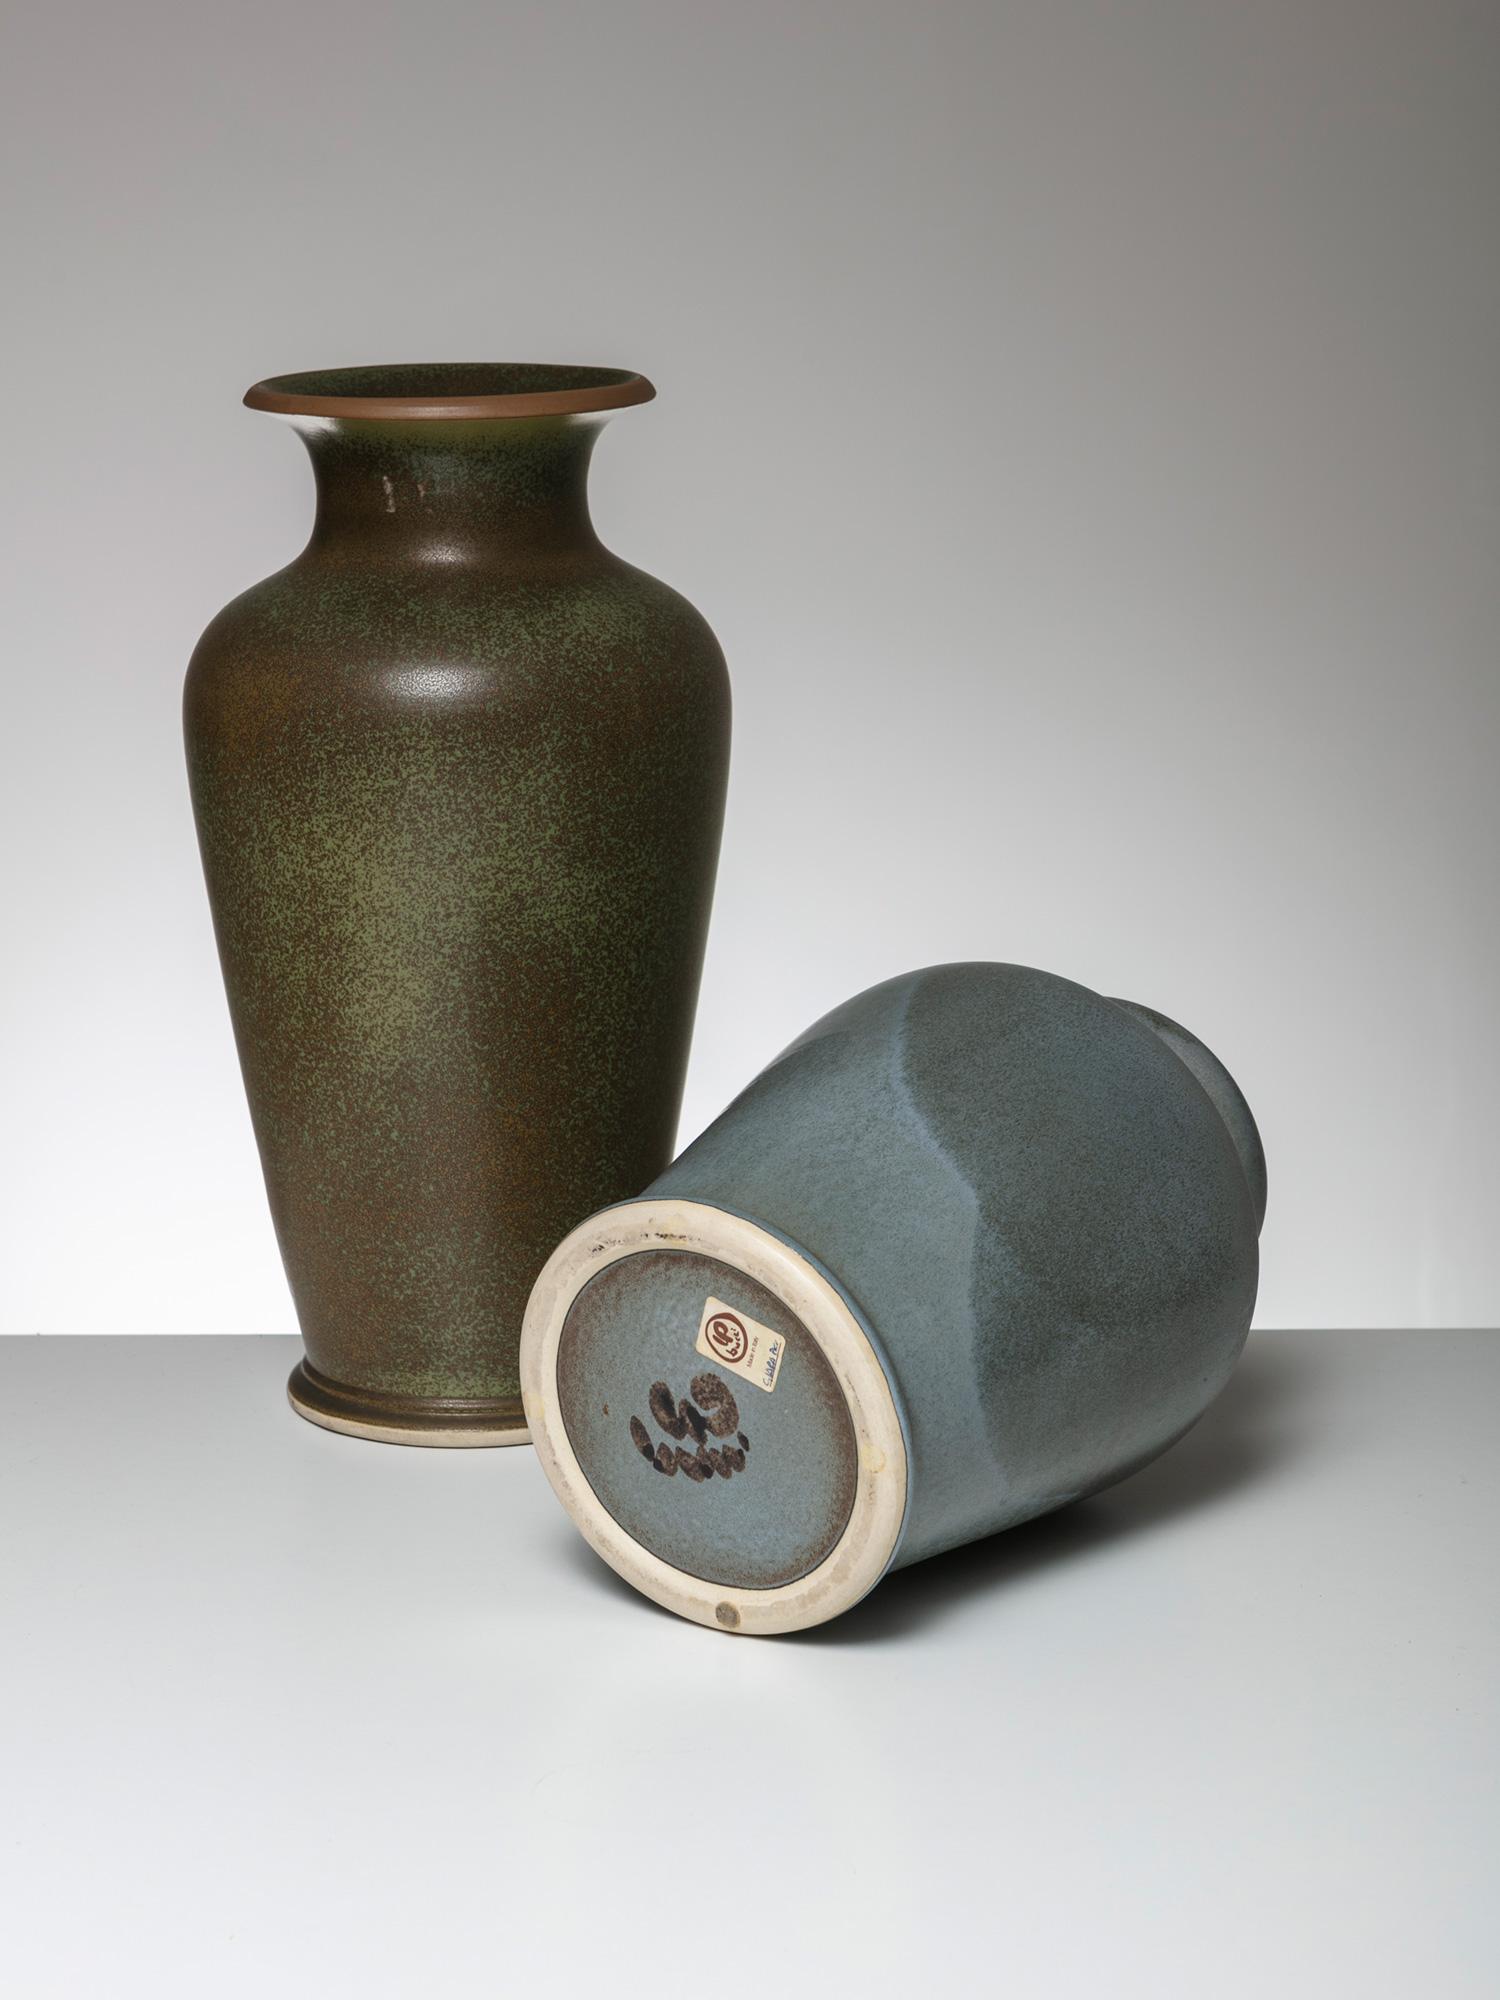 Set of two ceramic vases by Franco Bucci for Laboratorio Pesaro.
Size refers to the smaller piece.